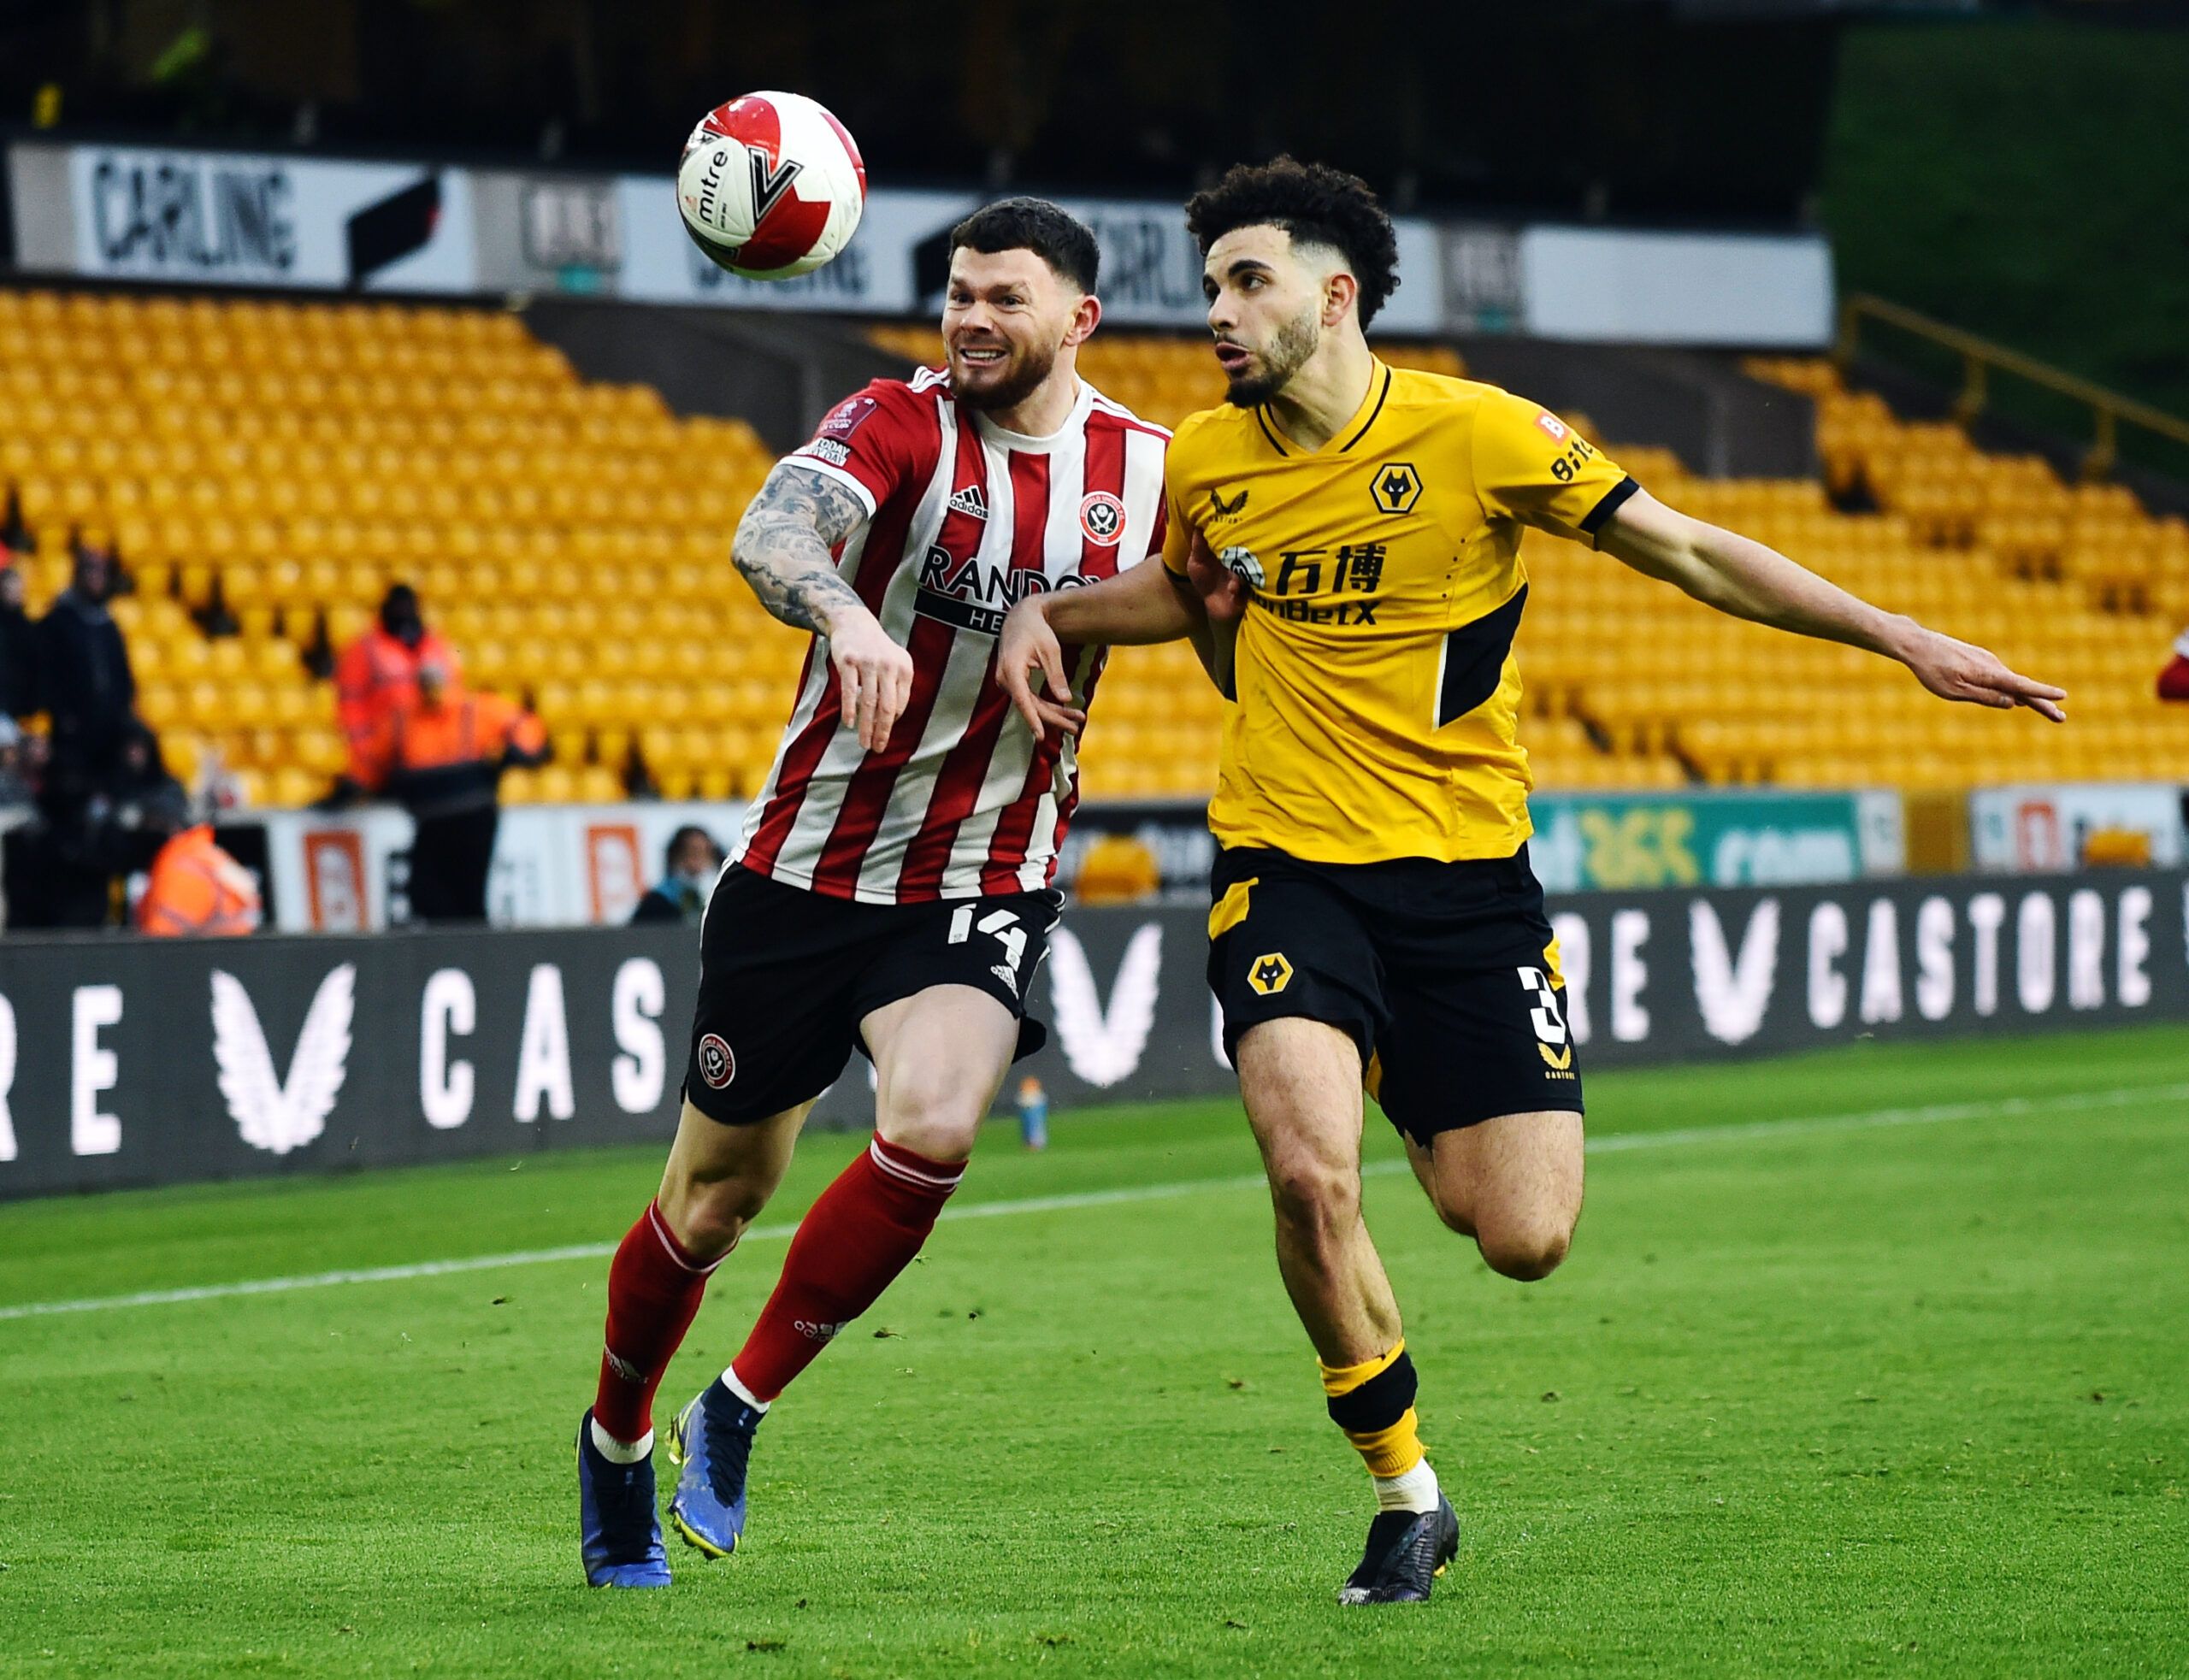 Soccer Football - FA Cup Third Round - Wolverhampton Wanderers v Sheffield United - Molineux Stadium, Wolverhampton, Britain - January 9, 2022 Sheffield United's Oliver Burke in action with Wolverhampton Wanderers' Rayan Ait-Nouri REUTERS/Peter Powell